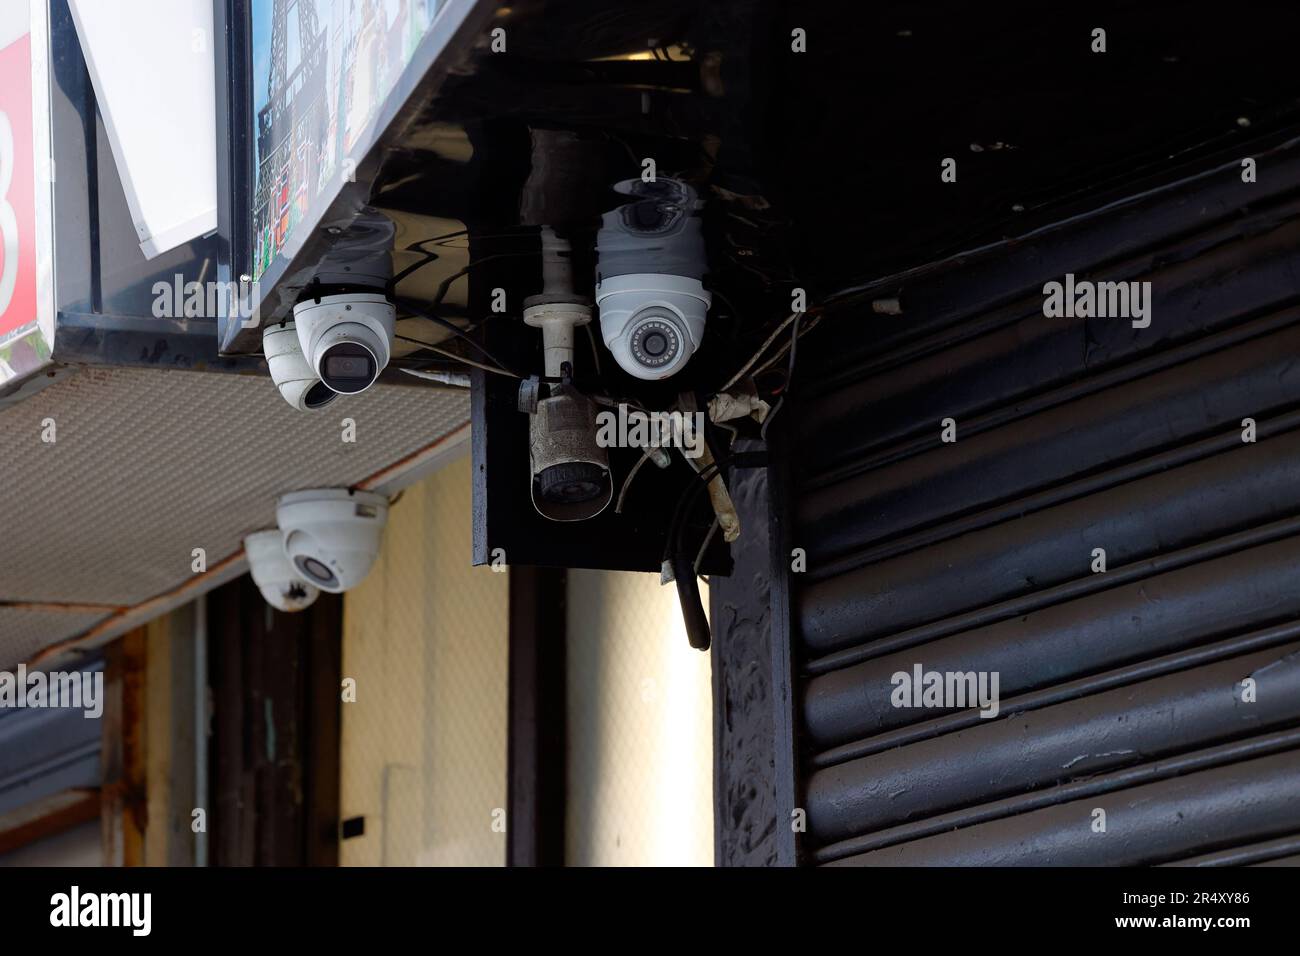 A bunch of CCTV security, close circuit surveillance cameras outside a store pointed in multiple directions toward a public street. Stock Photo